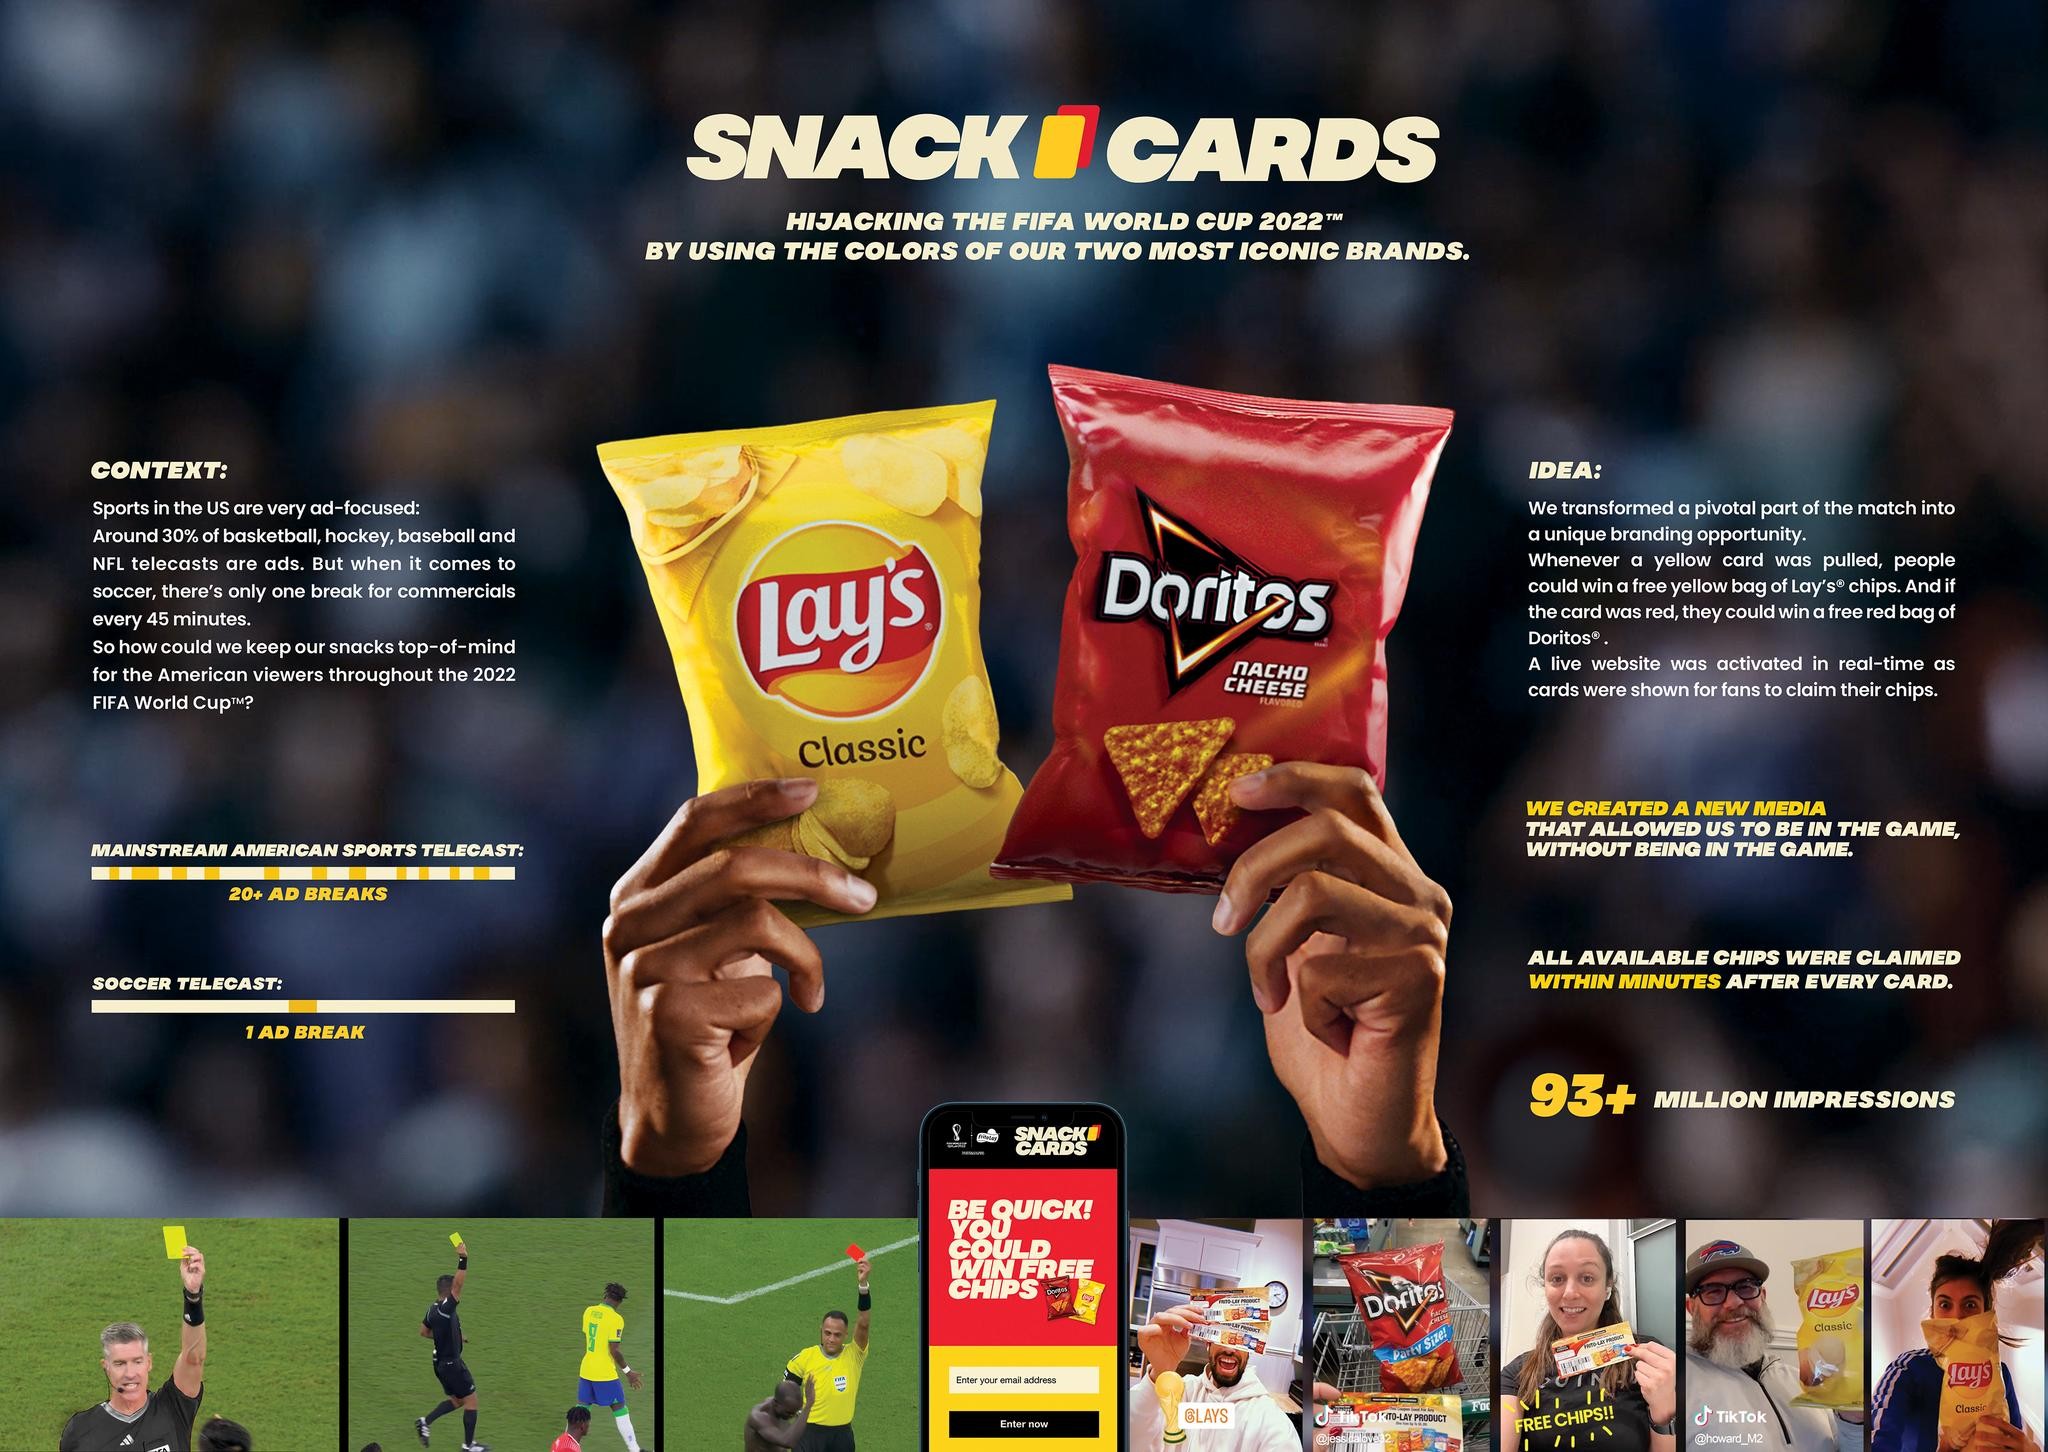 Snack Cards